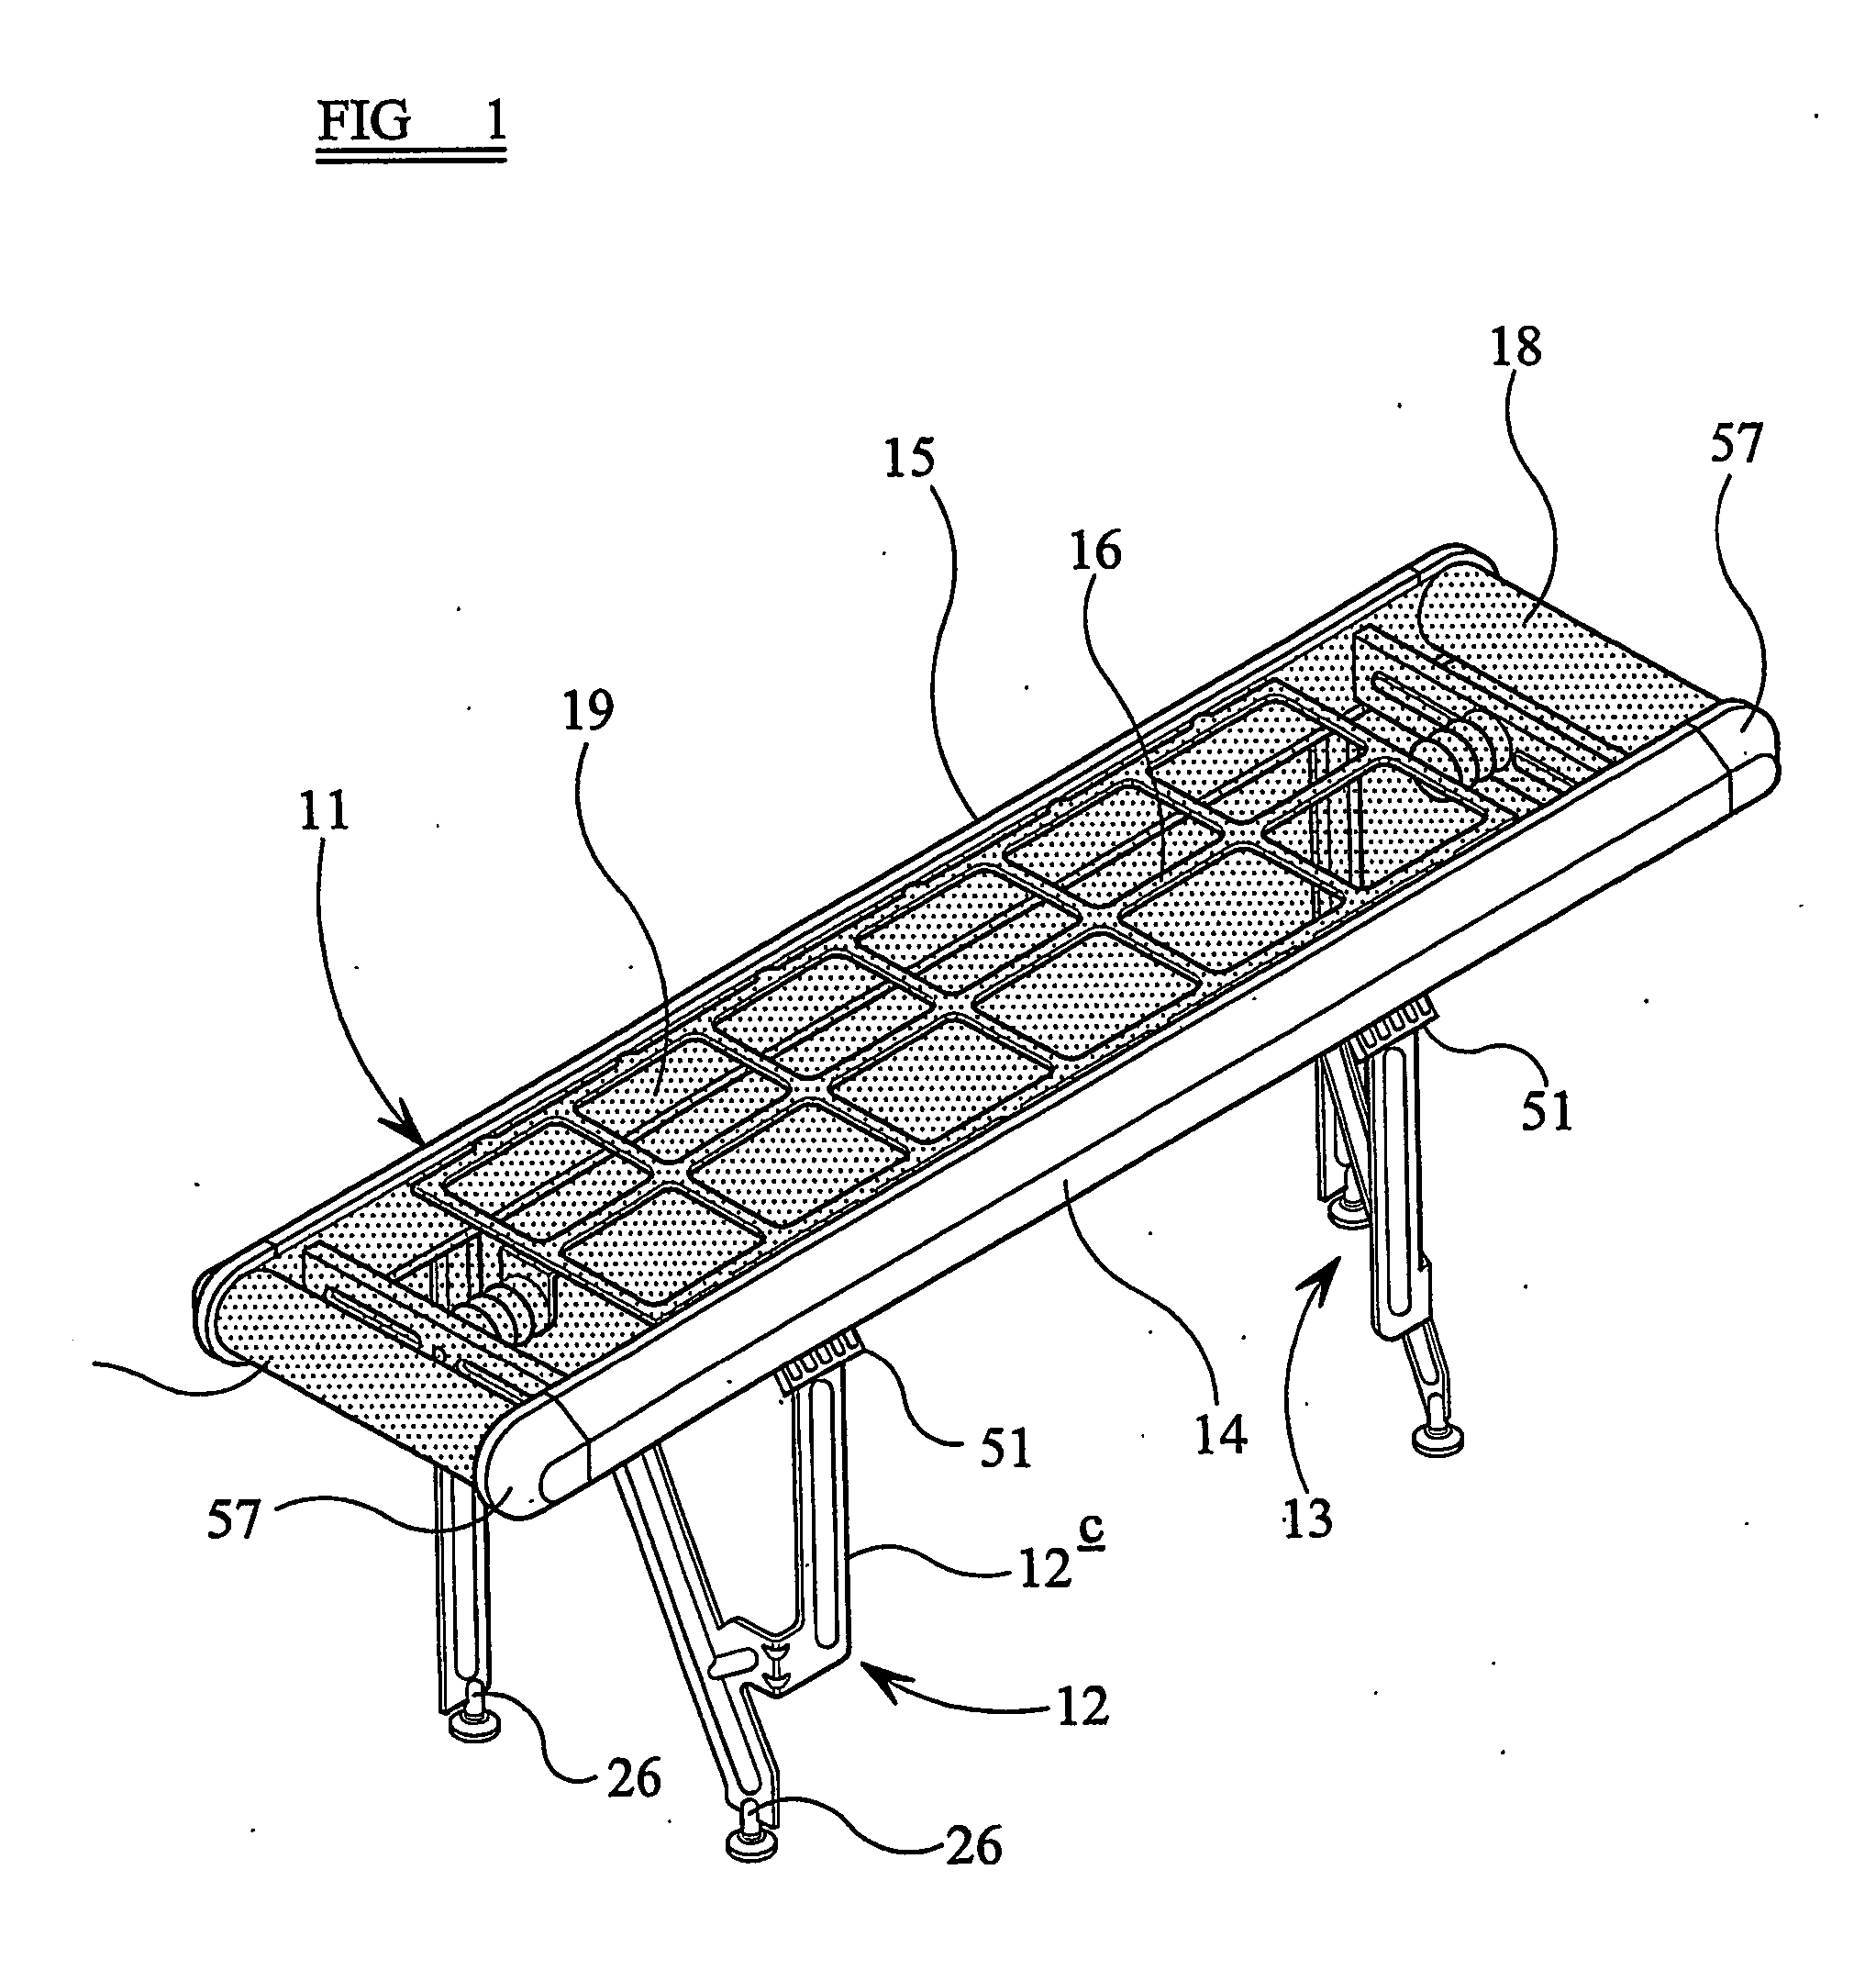 Belt conveyor with a supporting platform formed from a single sheet of metal